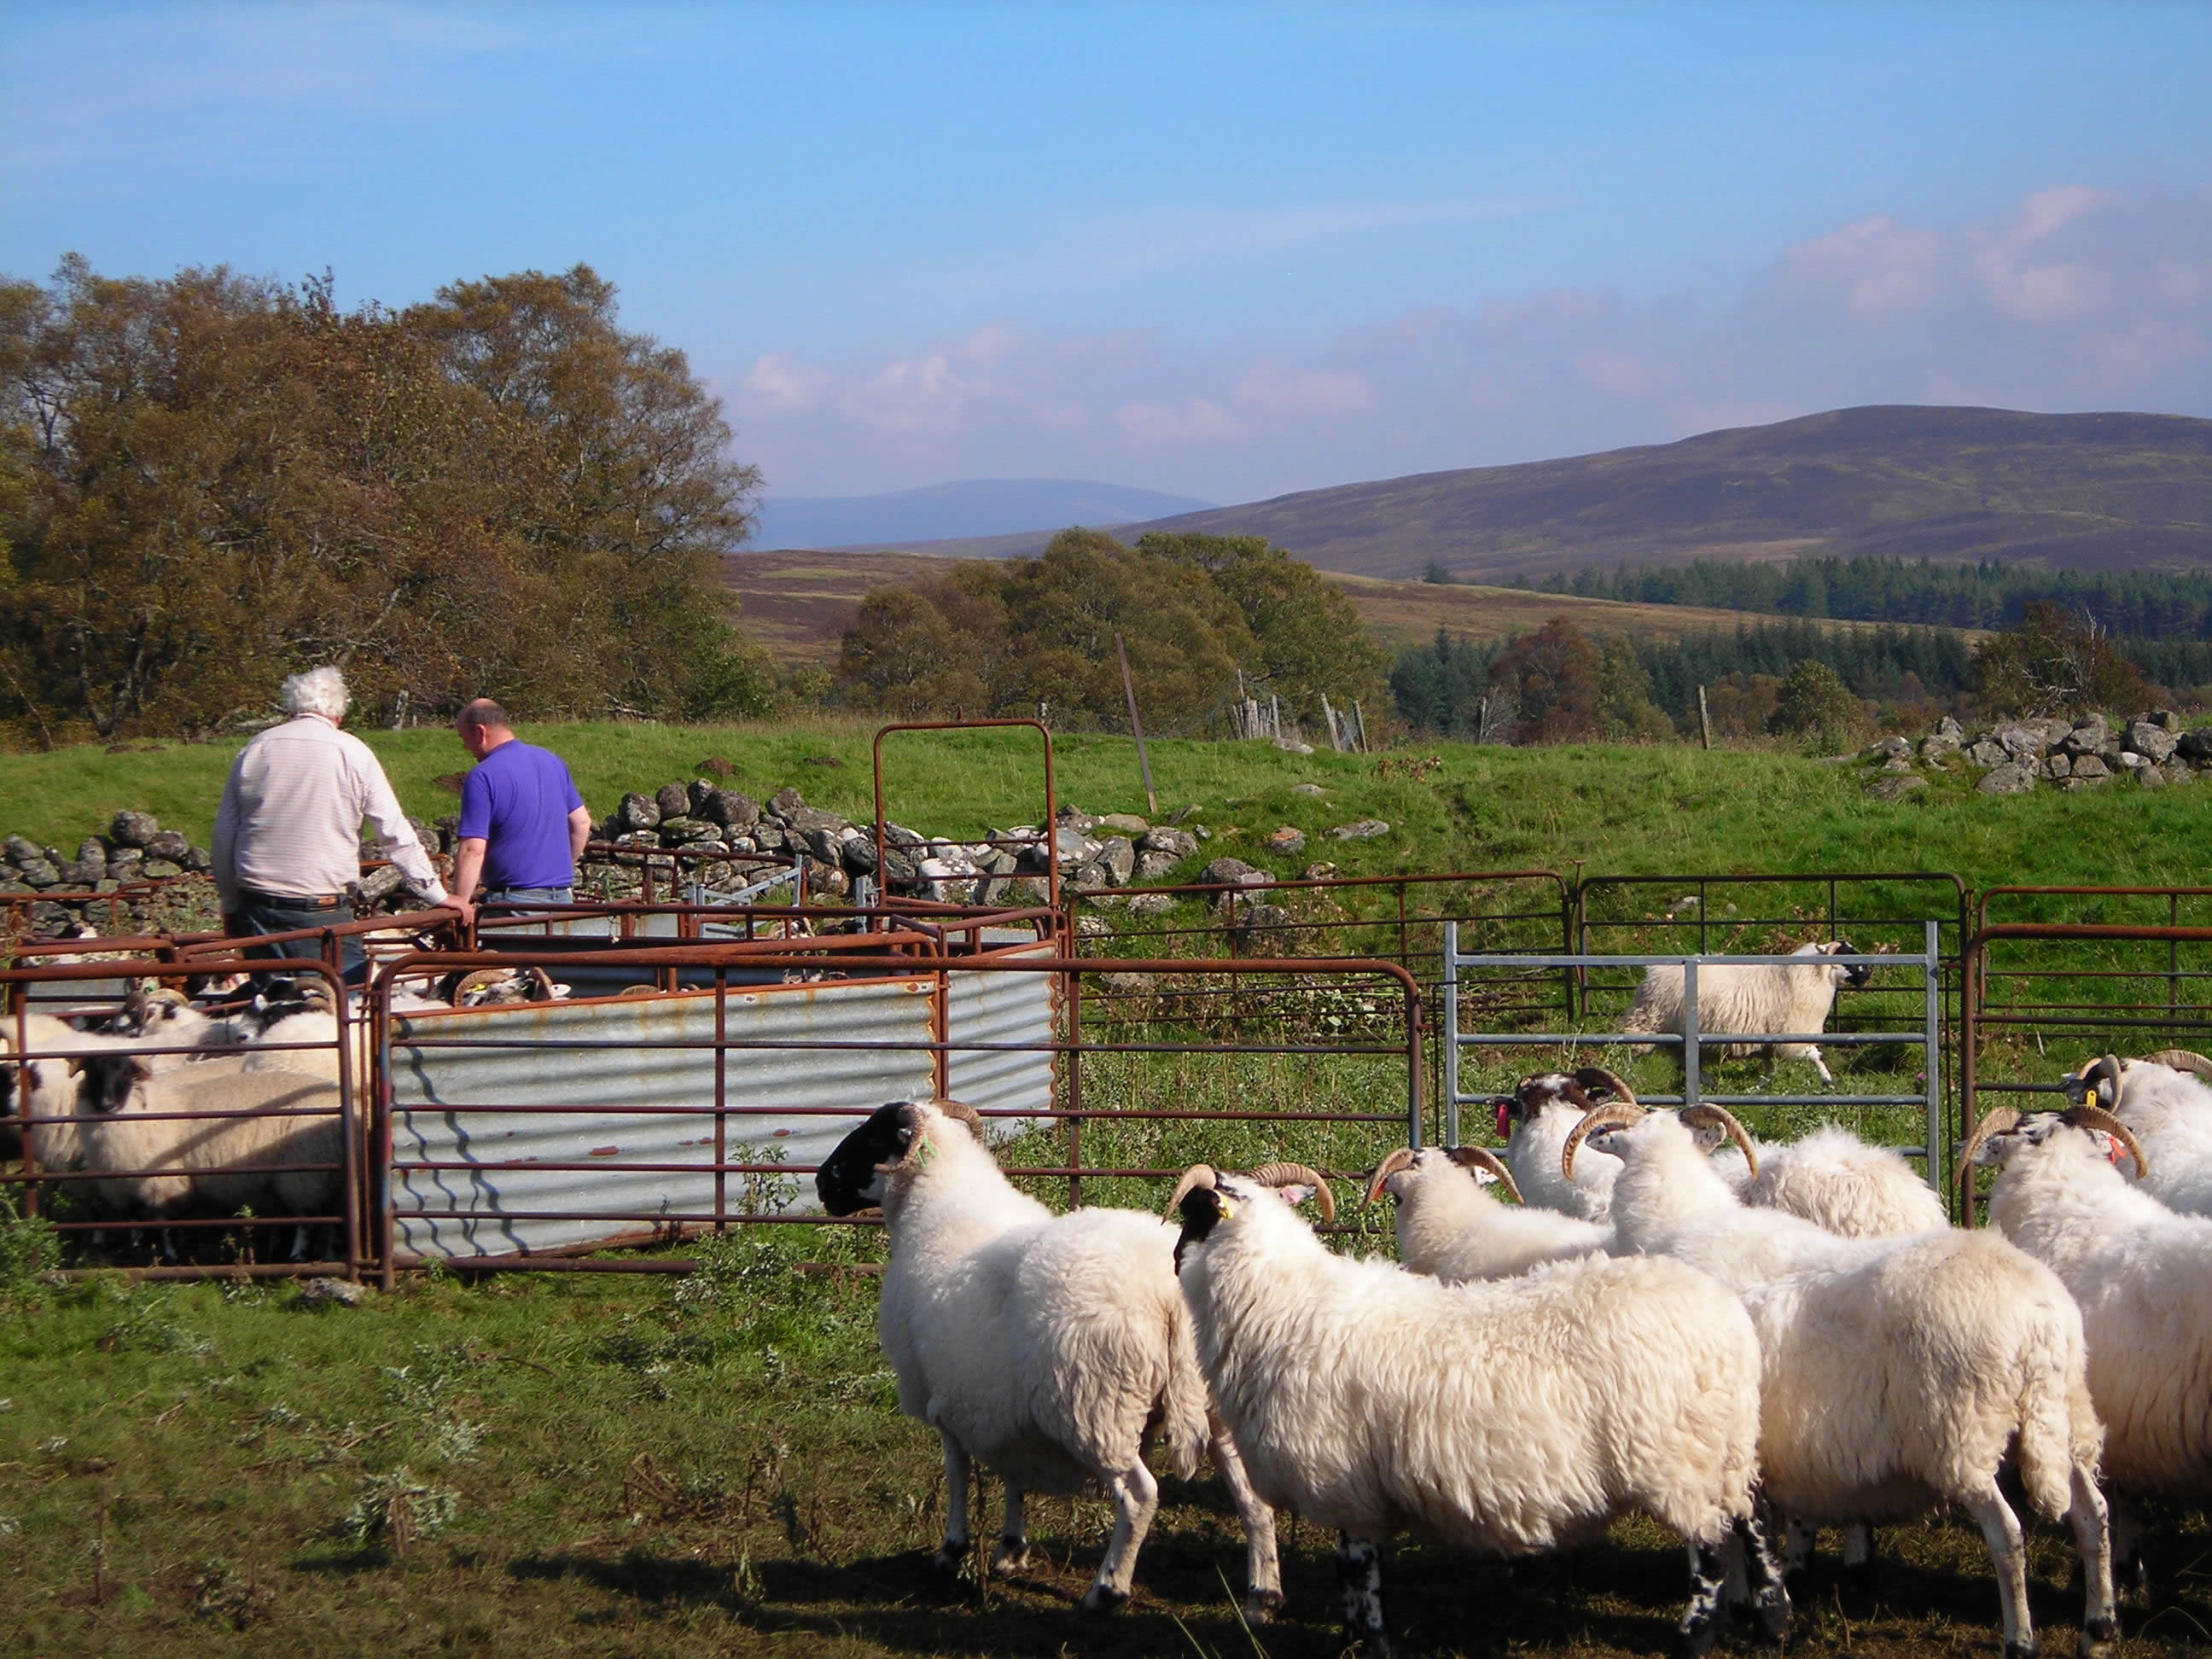 Radical policy shift gives Crown Estate Scotland’s tenants an opportunity to buy farms